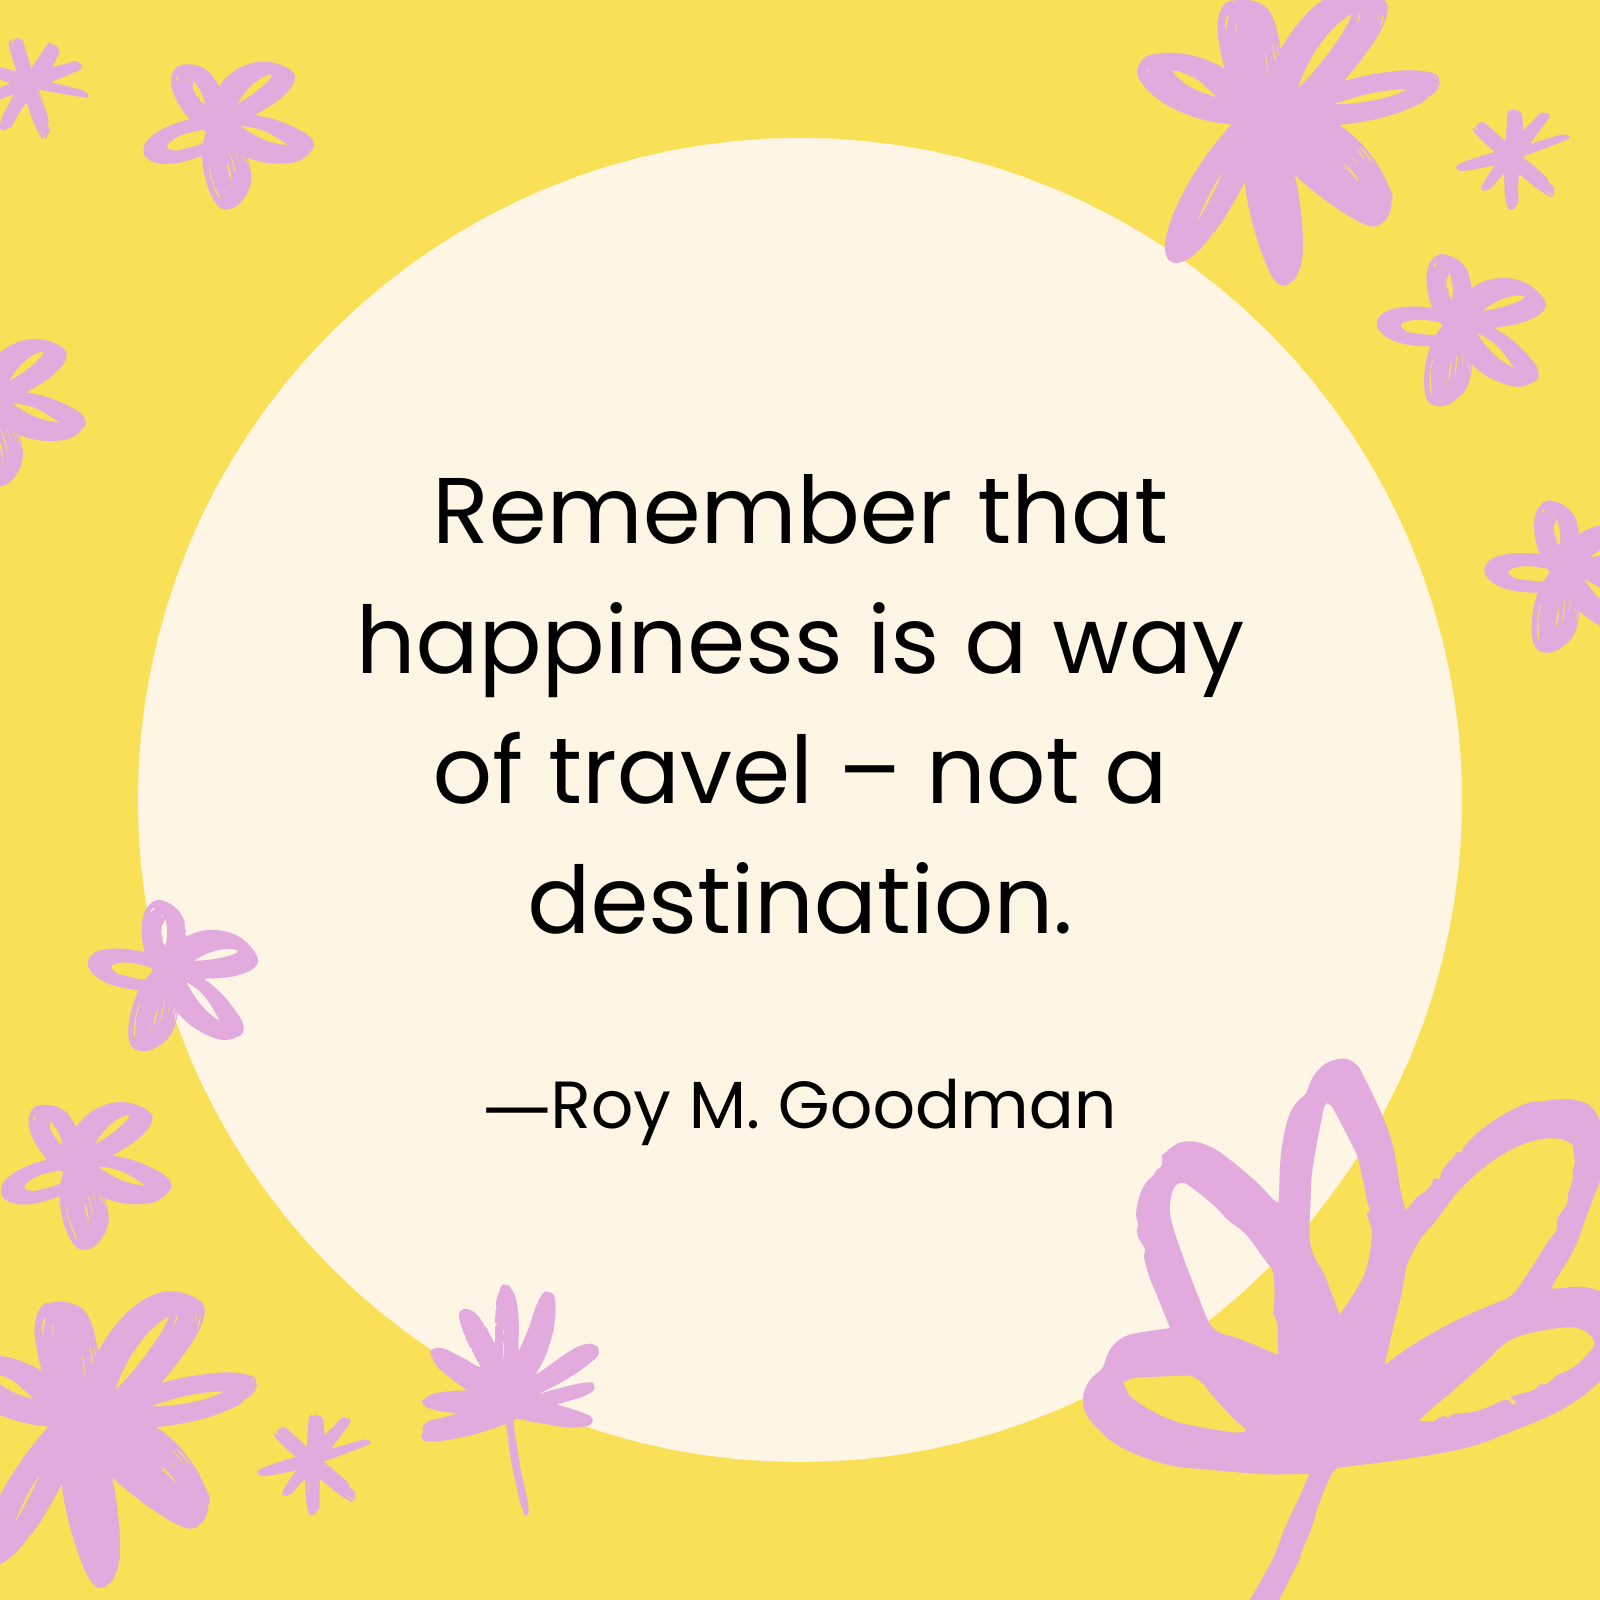 <p>"Remember that happiness is a way of travel — not a destination." —Roy M. Goodman</p>